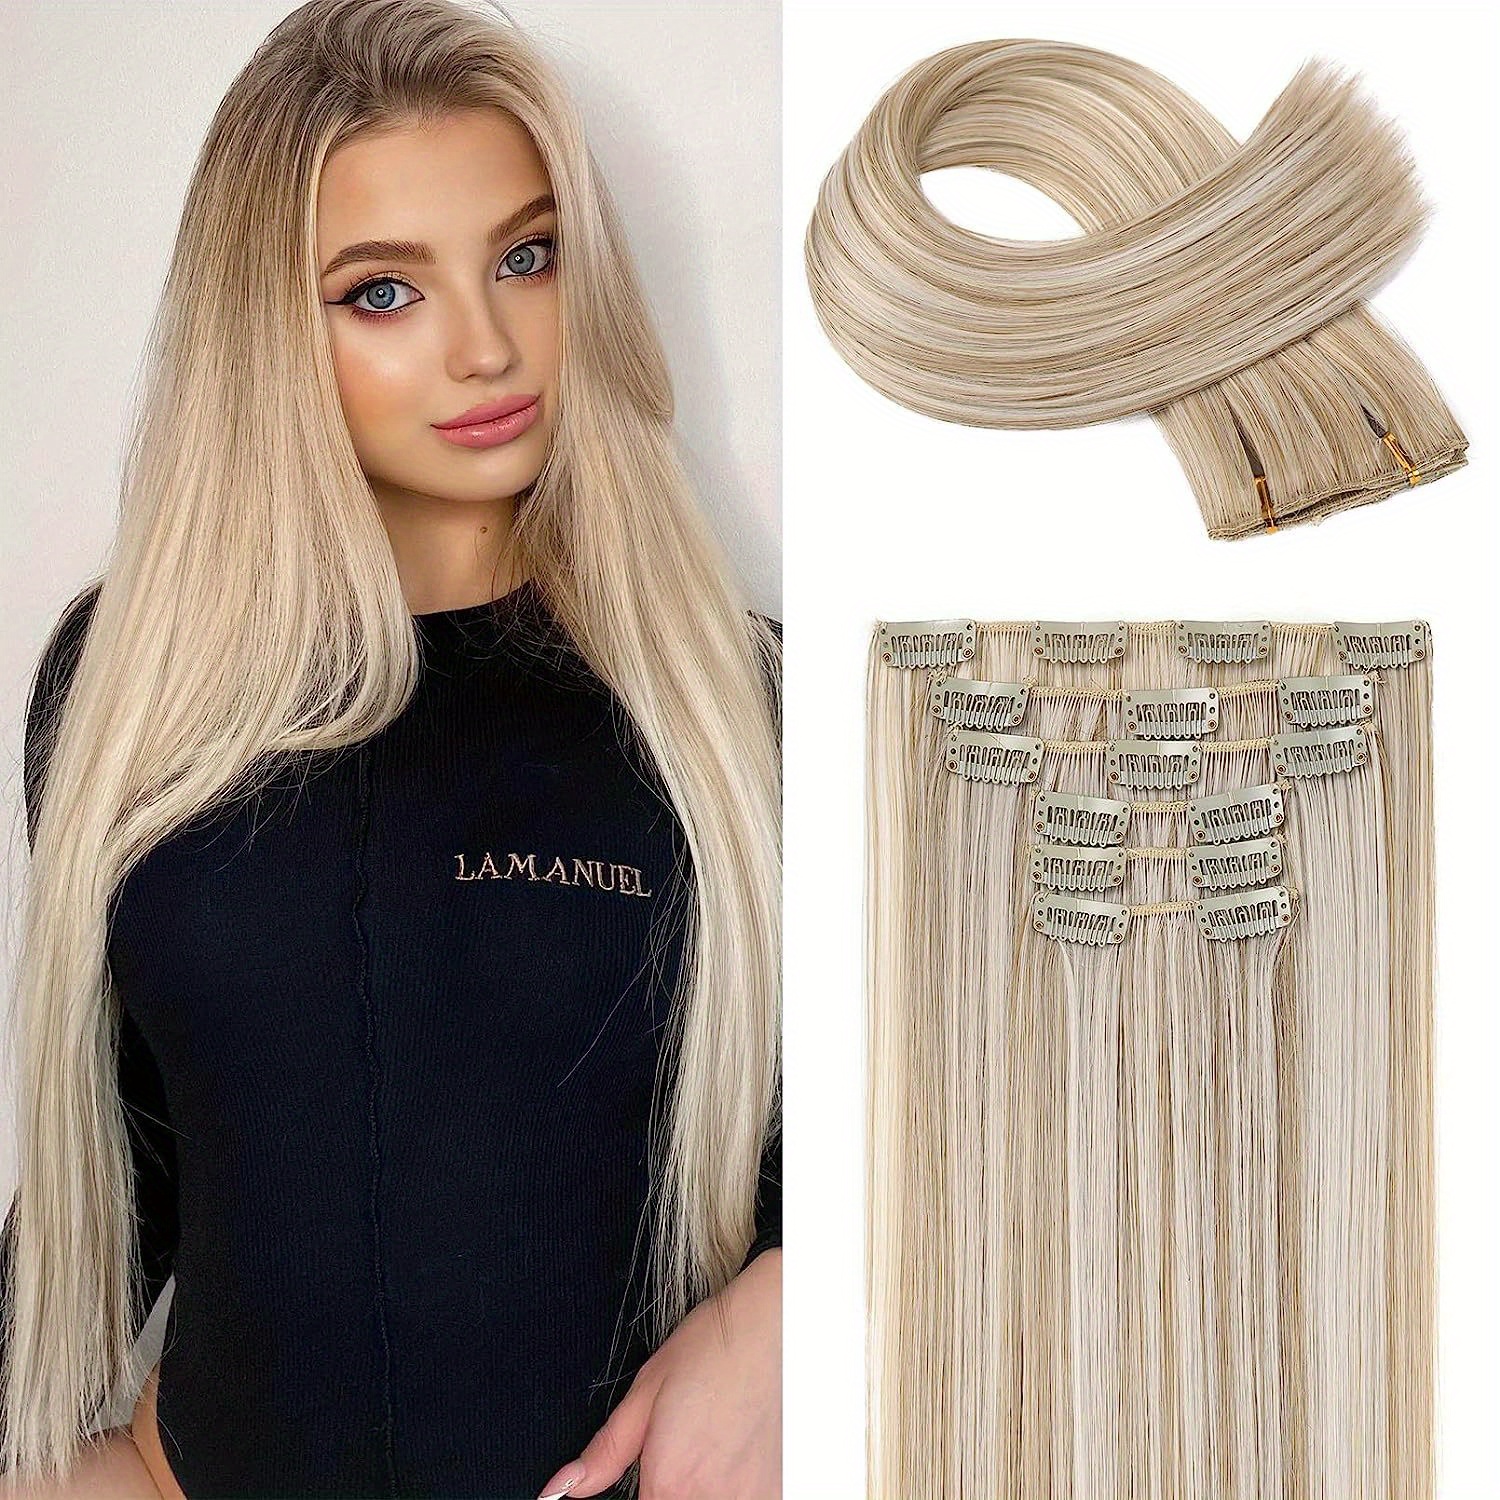 Real Soft Clips In Hair Extensions Full Head Real Thick Straight/Curly Hair  Extensions 18/23/24/26 Long Thick Hair Extension Like Human